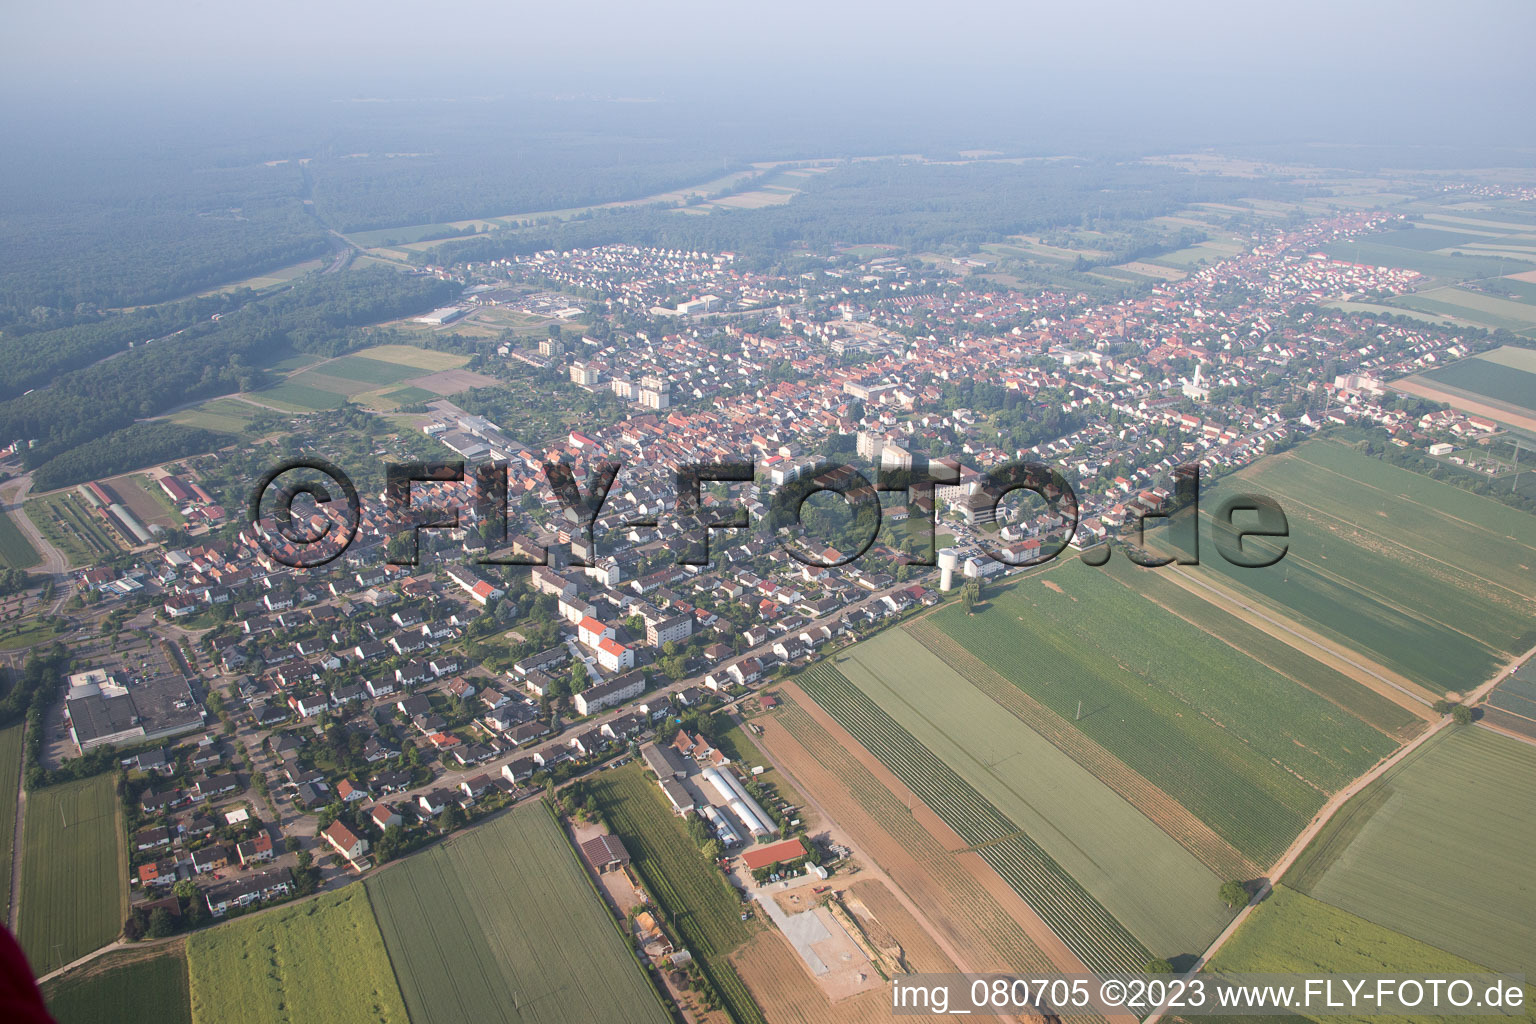 Kandel in the state Rhineland-Palatinate, Germany seen from a drone